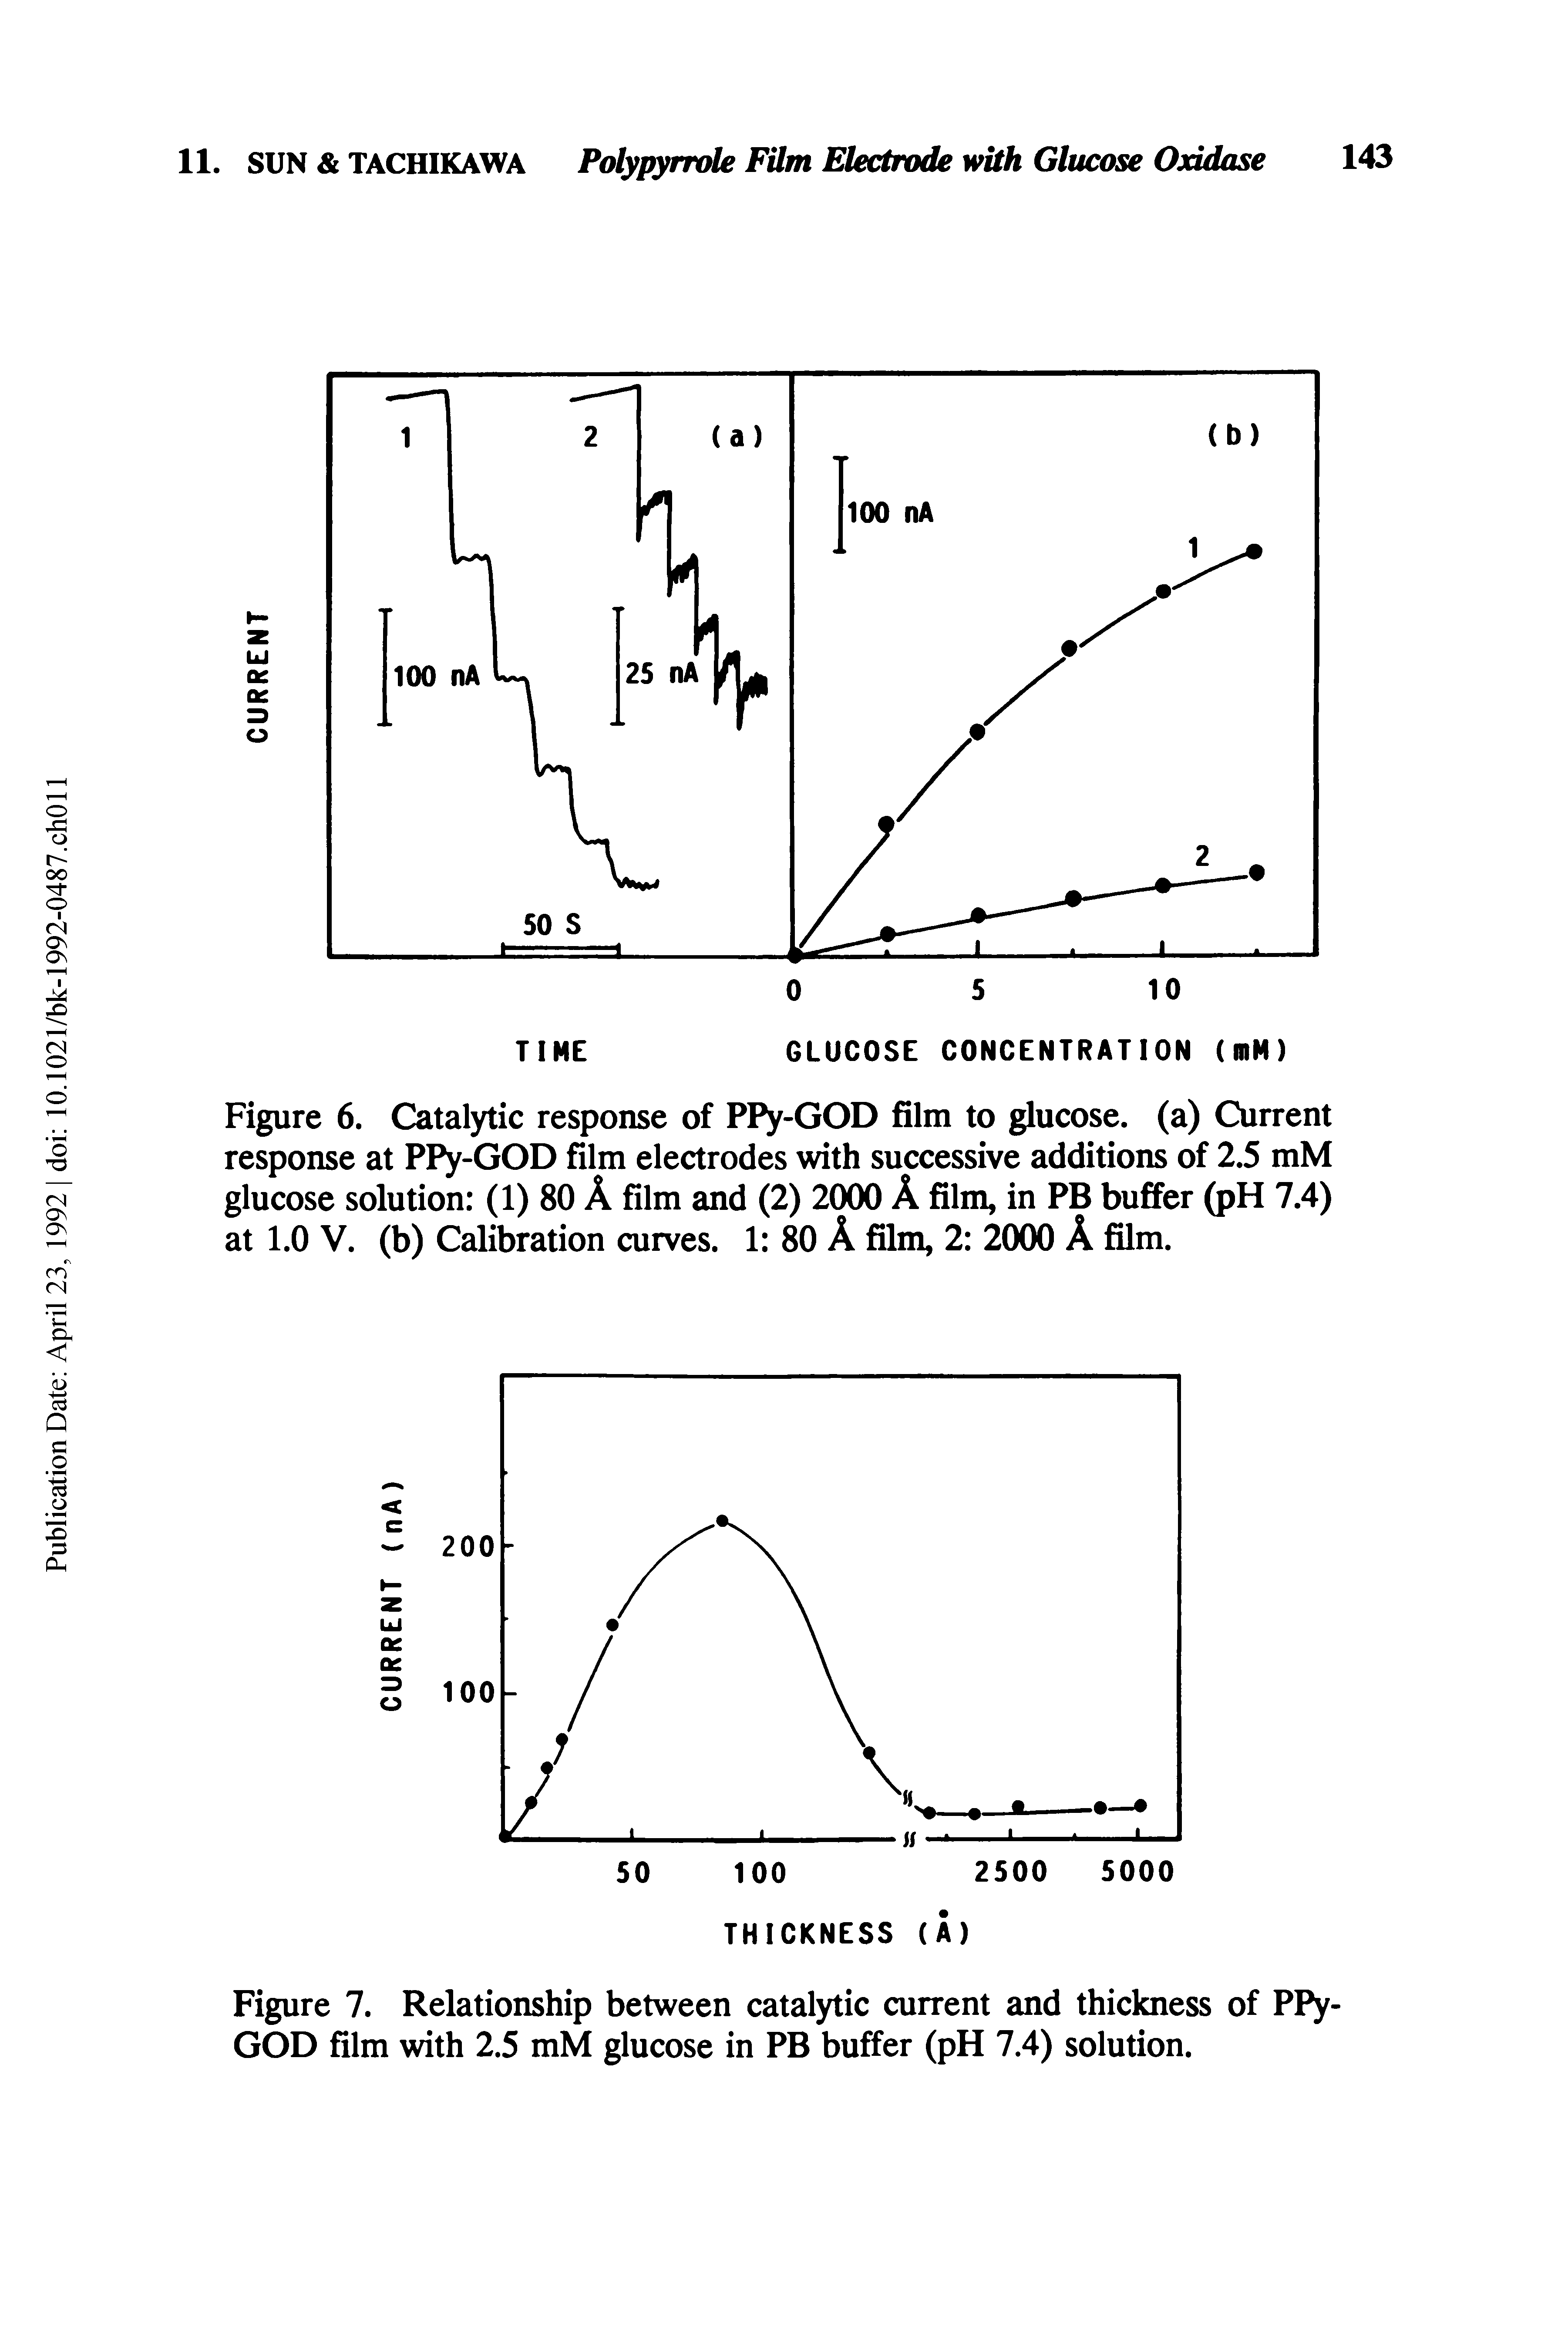 Figure 6. Catalytic response of PPy-GOD film to glucose, (a) Current response at PPy-GOD film electrodes with successive additions of 2.5 mM glucose solution (1) 80 A film and (2) 2000 A film, in PB buffer (pH 7.4) at 1.0 V. (b) Calibration curves. 1 80 A film, 2 2000 A film.